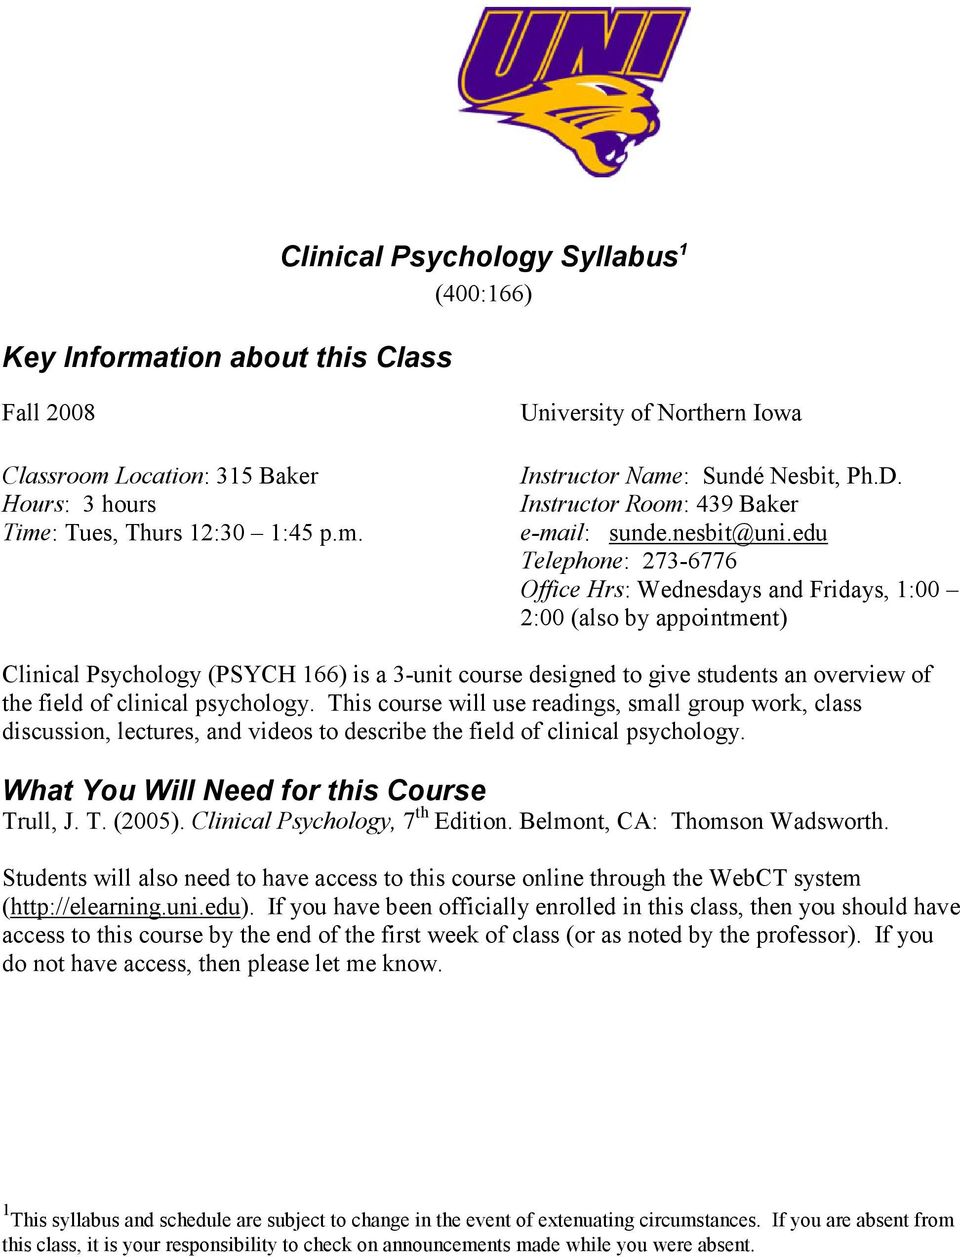 edu Telephone: 273-6776 Office Hrs: Wednesdays and Fridays, 1:00 2:00 (also by appointment) Clinical Psychology (PSYCH 166) is a 3-unit course designed to give students an overview of the field of